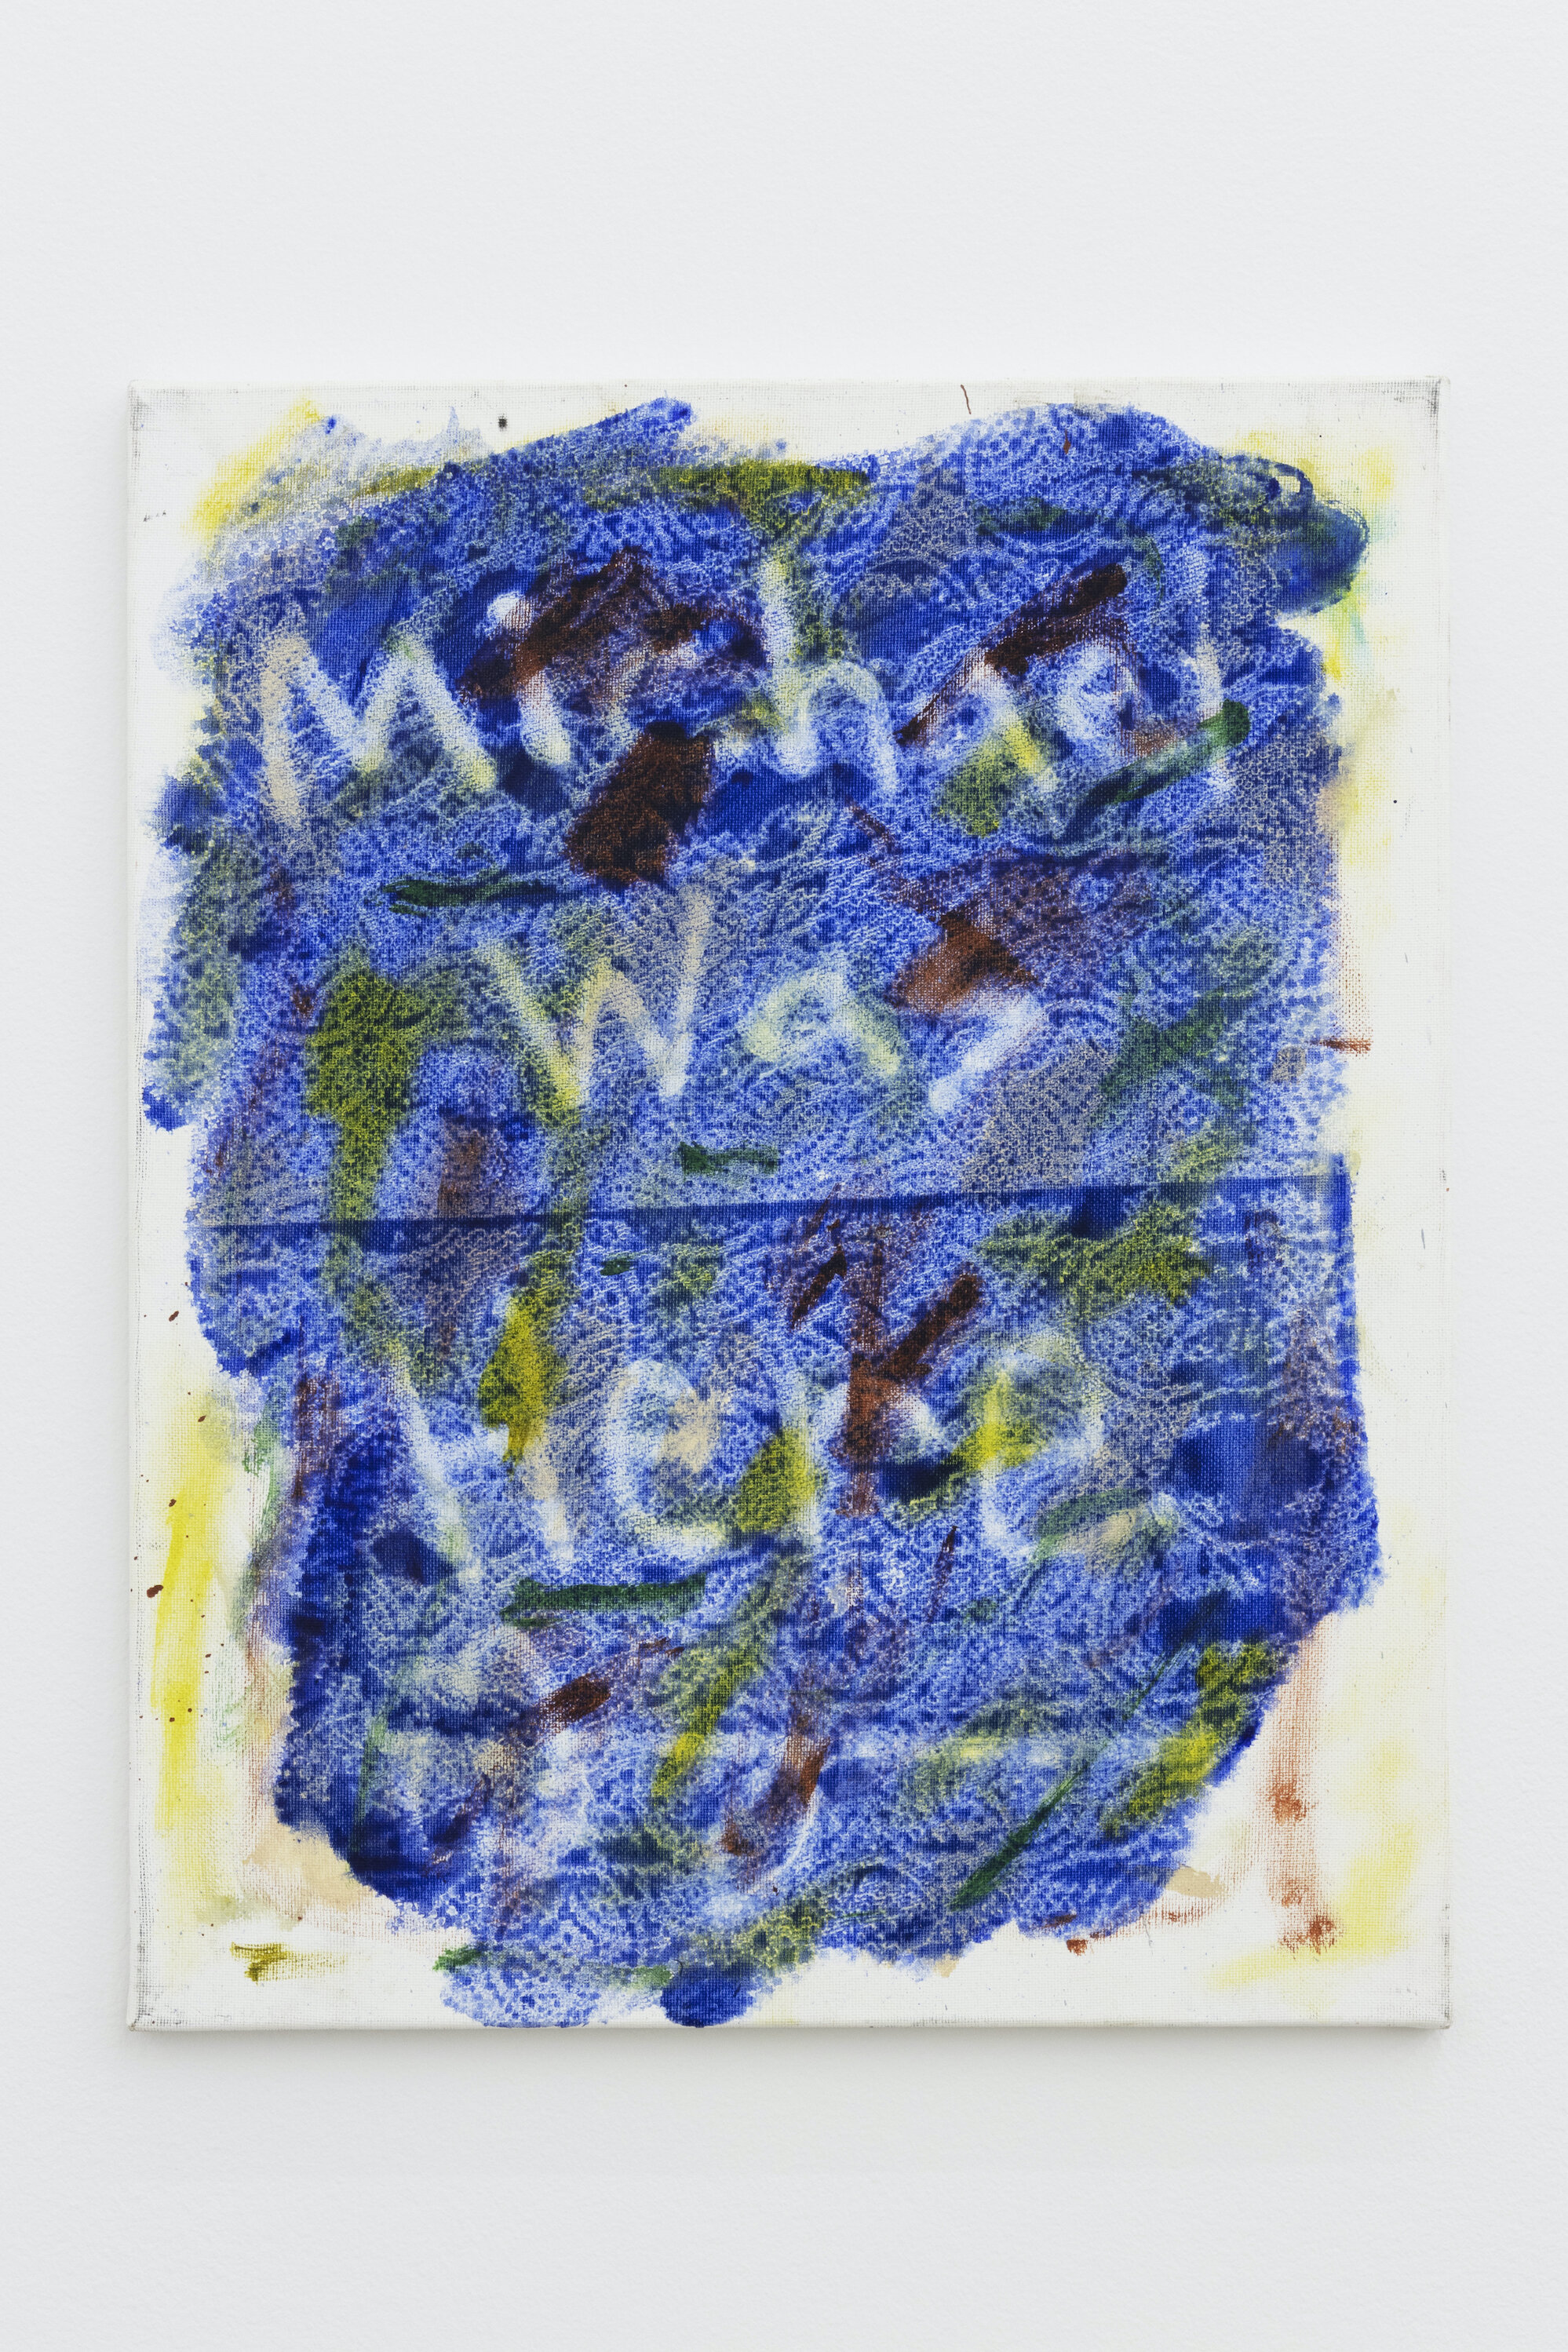   Michael Was Present,  2015, acrylic on canvas, 20 x 16 in. 